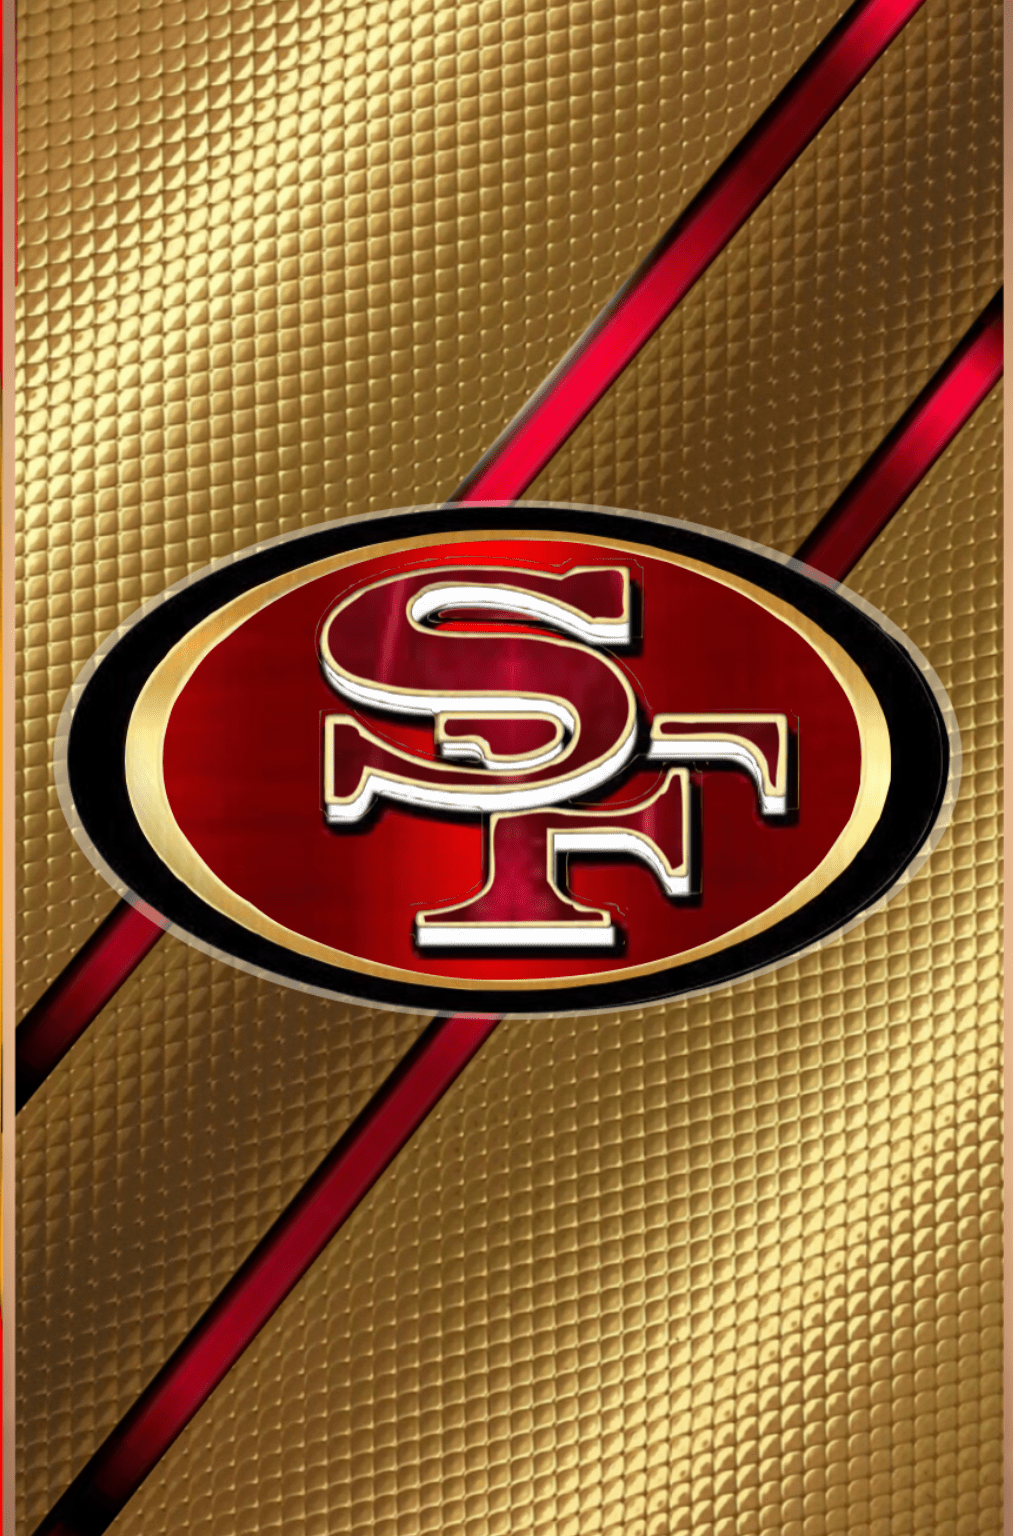 SF 49ers Wallpapers - Top 30 Best SF 49ers Wallpapers Download